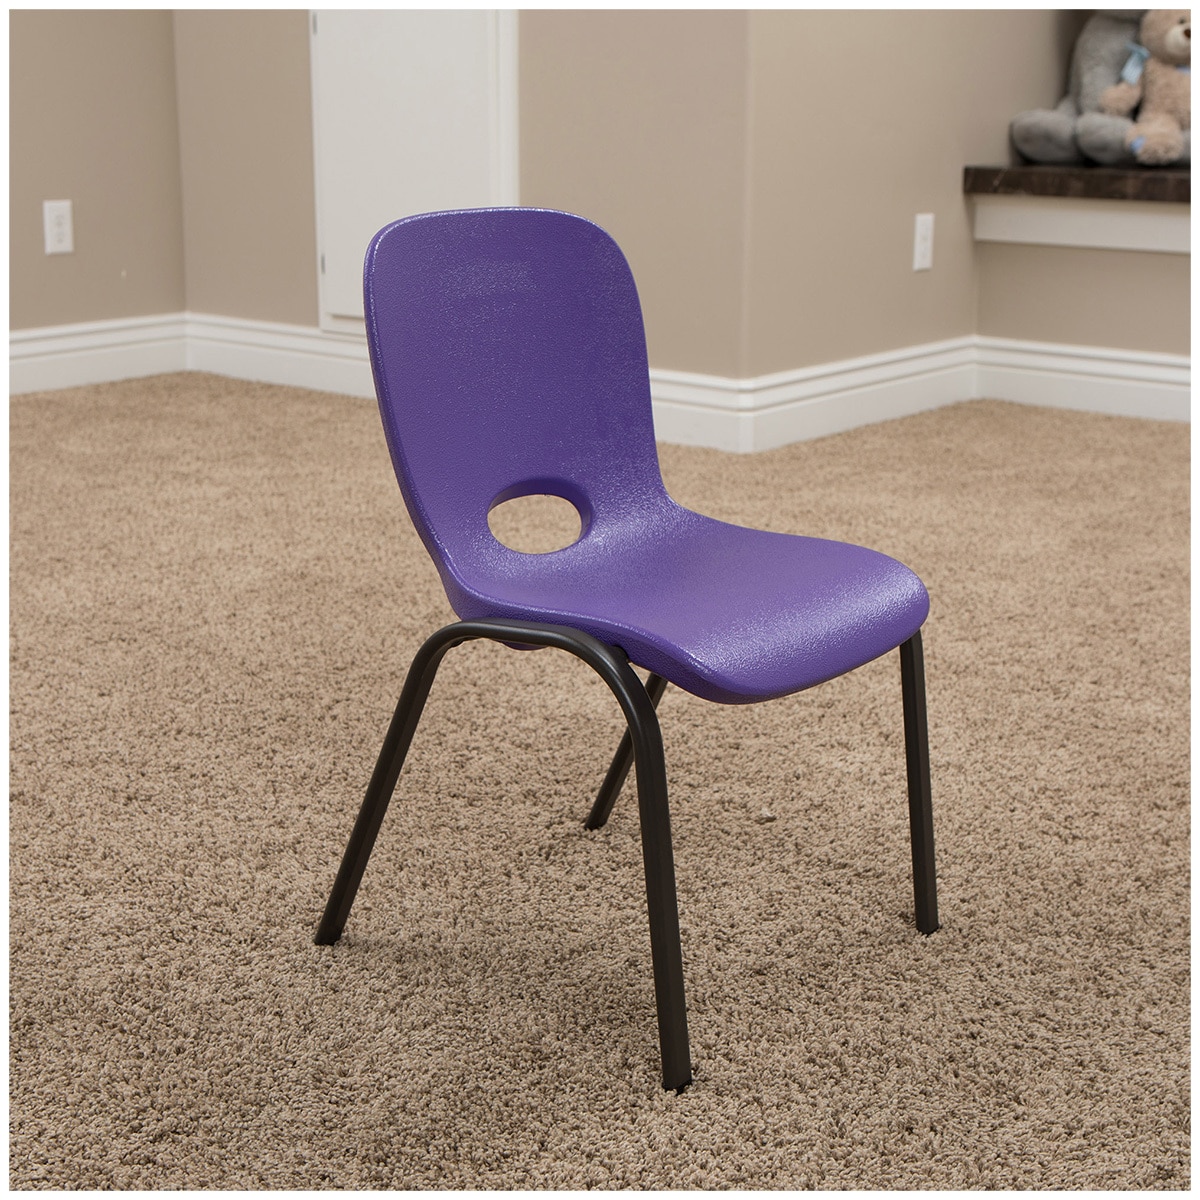 Lifetime Kids Stacking Chairs - Purple